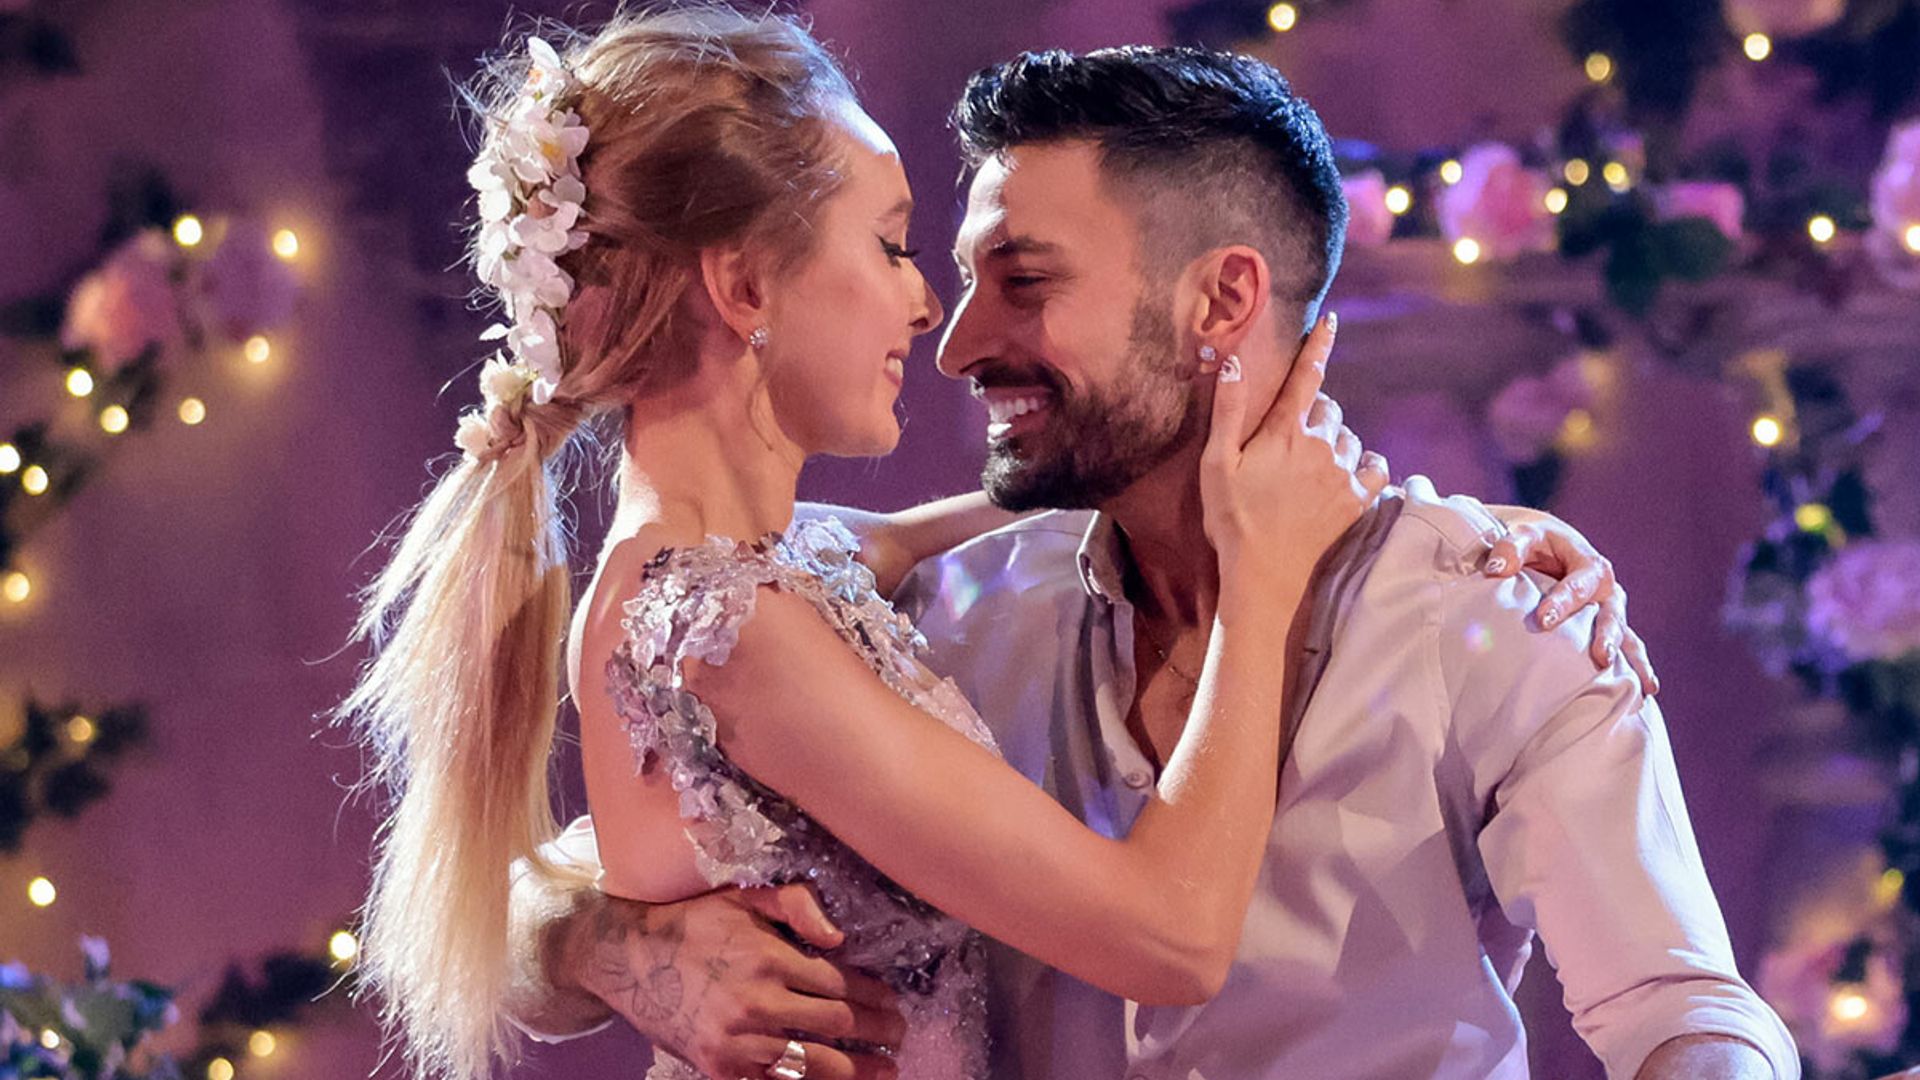 Giovanni Pernice reveals special night planned with Rose Ayling-Ellis